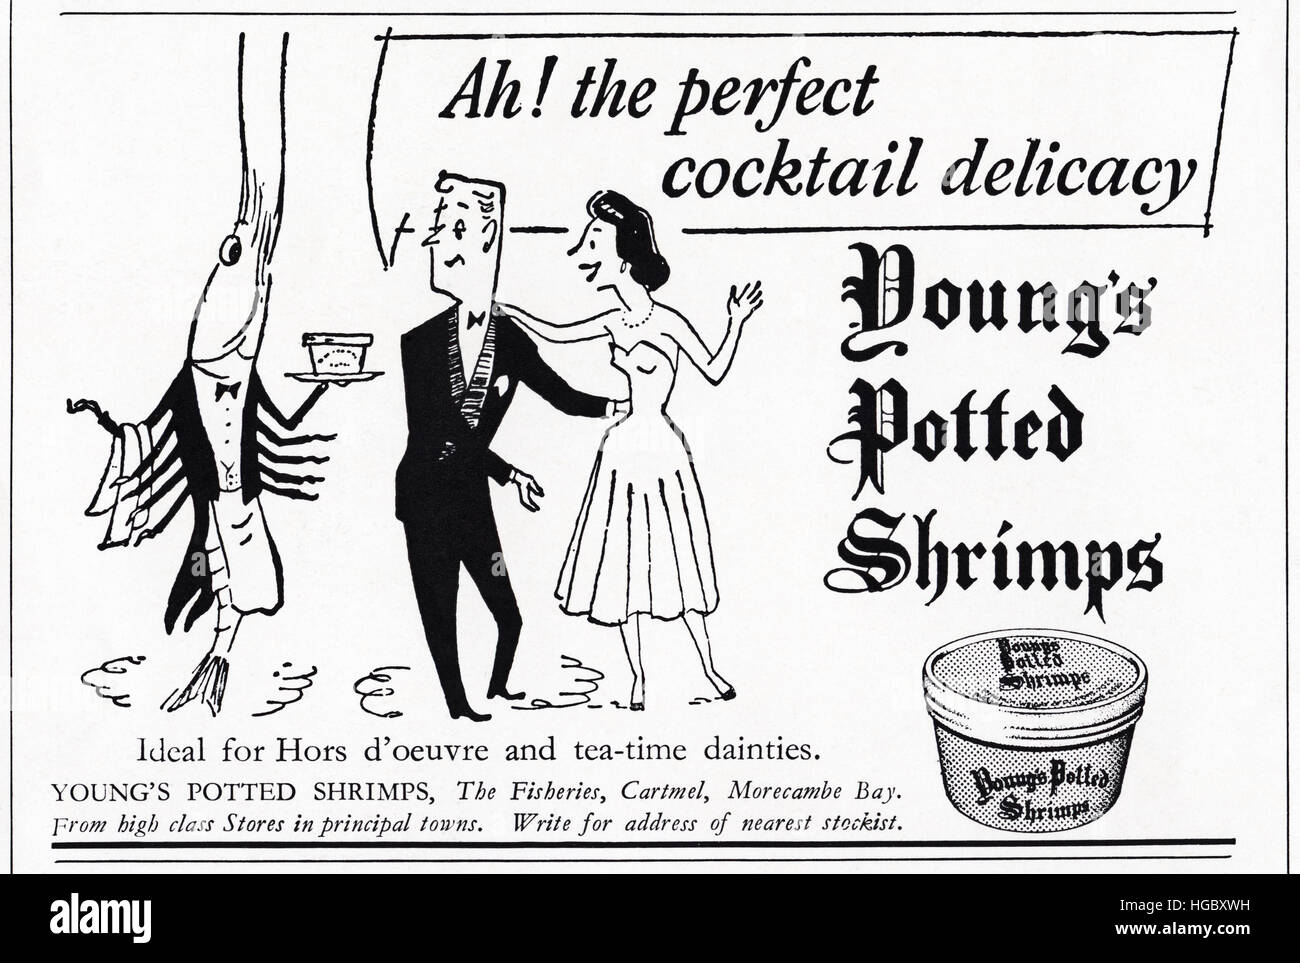 1950s advertising advert from original old vintage English magazine dated 1953 advertisement for Young's Potted Shrimps of The Fisheries, Cartmel, Morecambe Bay, England, UK Stock Photo